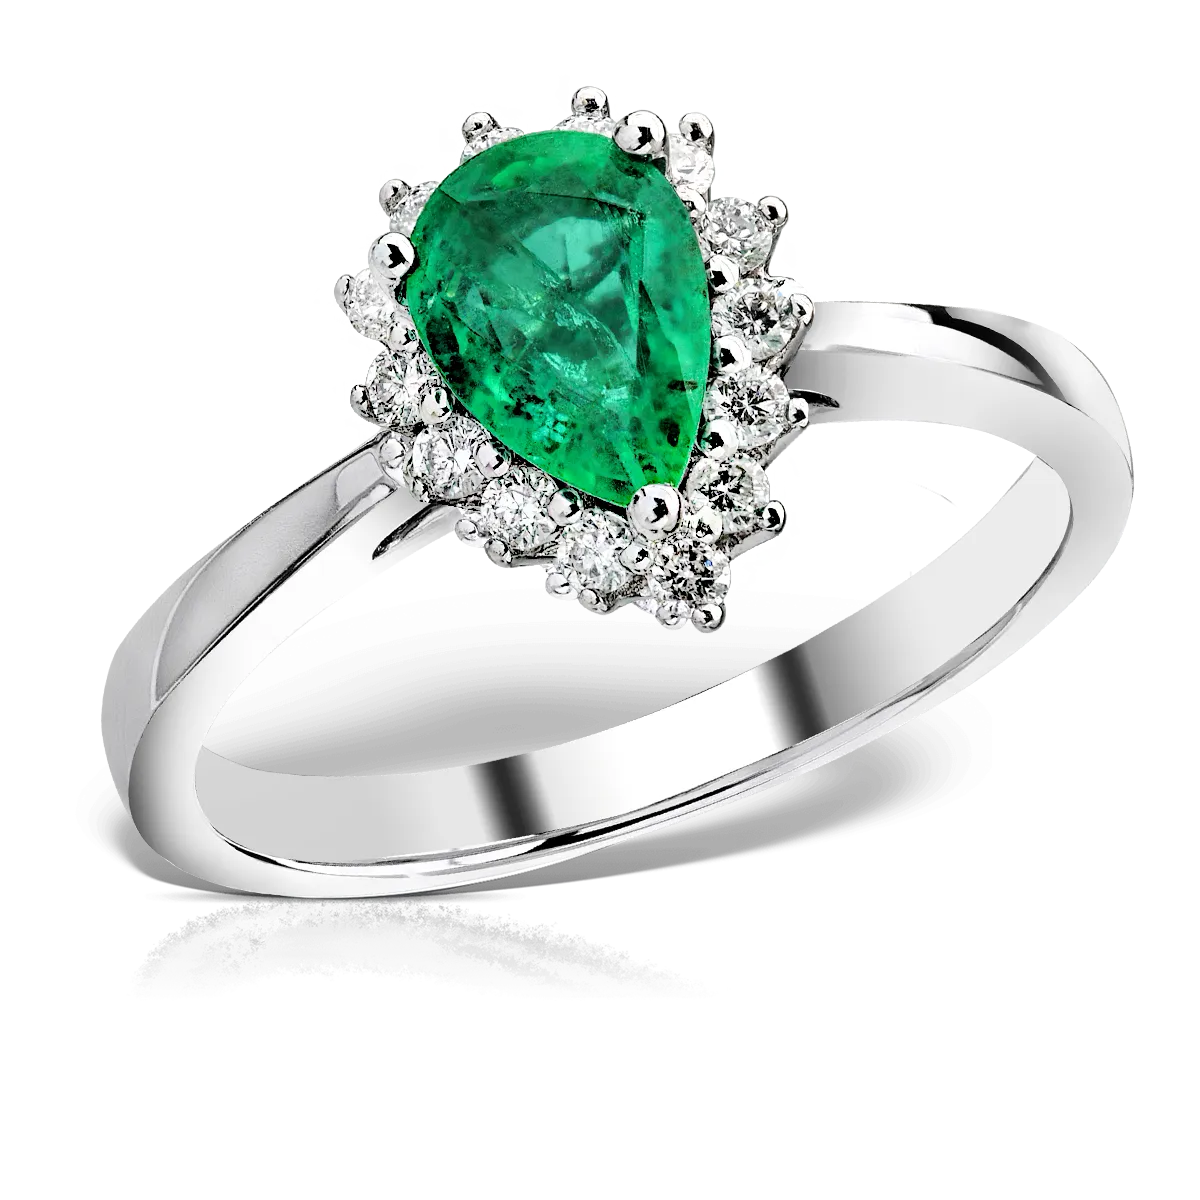 18K white gold ring with 0.75ct emerald and 0.17ct diamonds